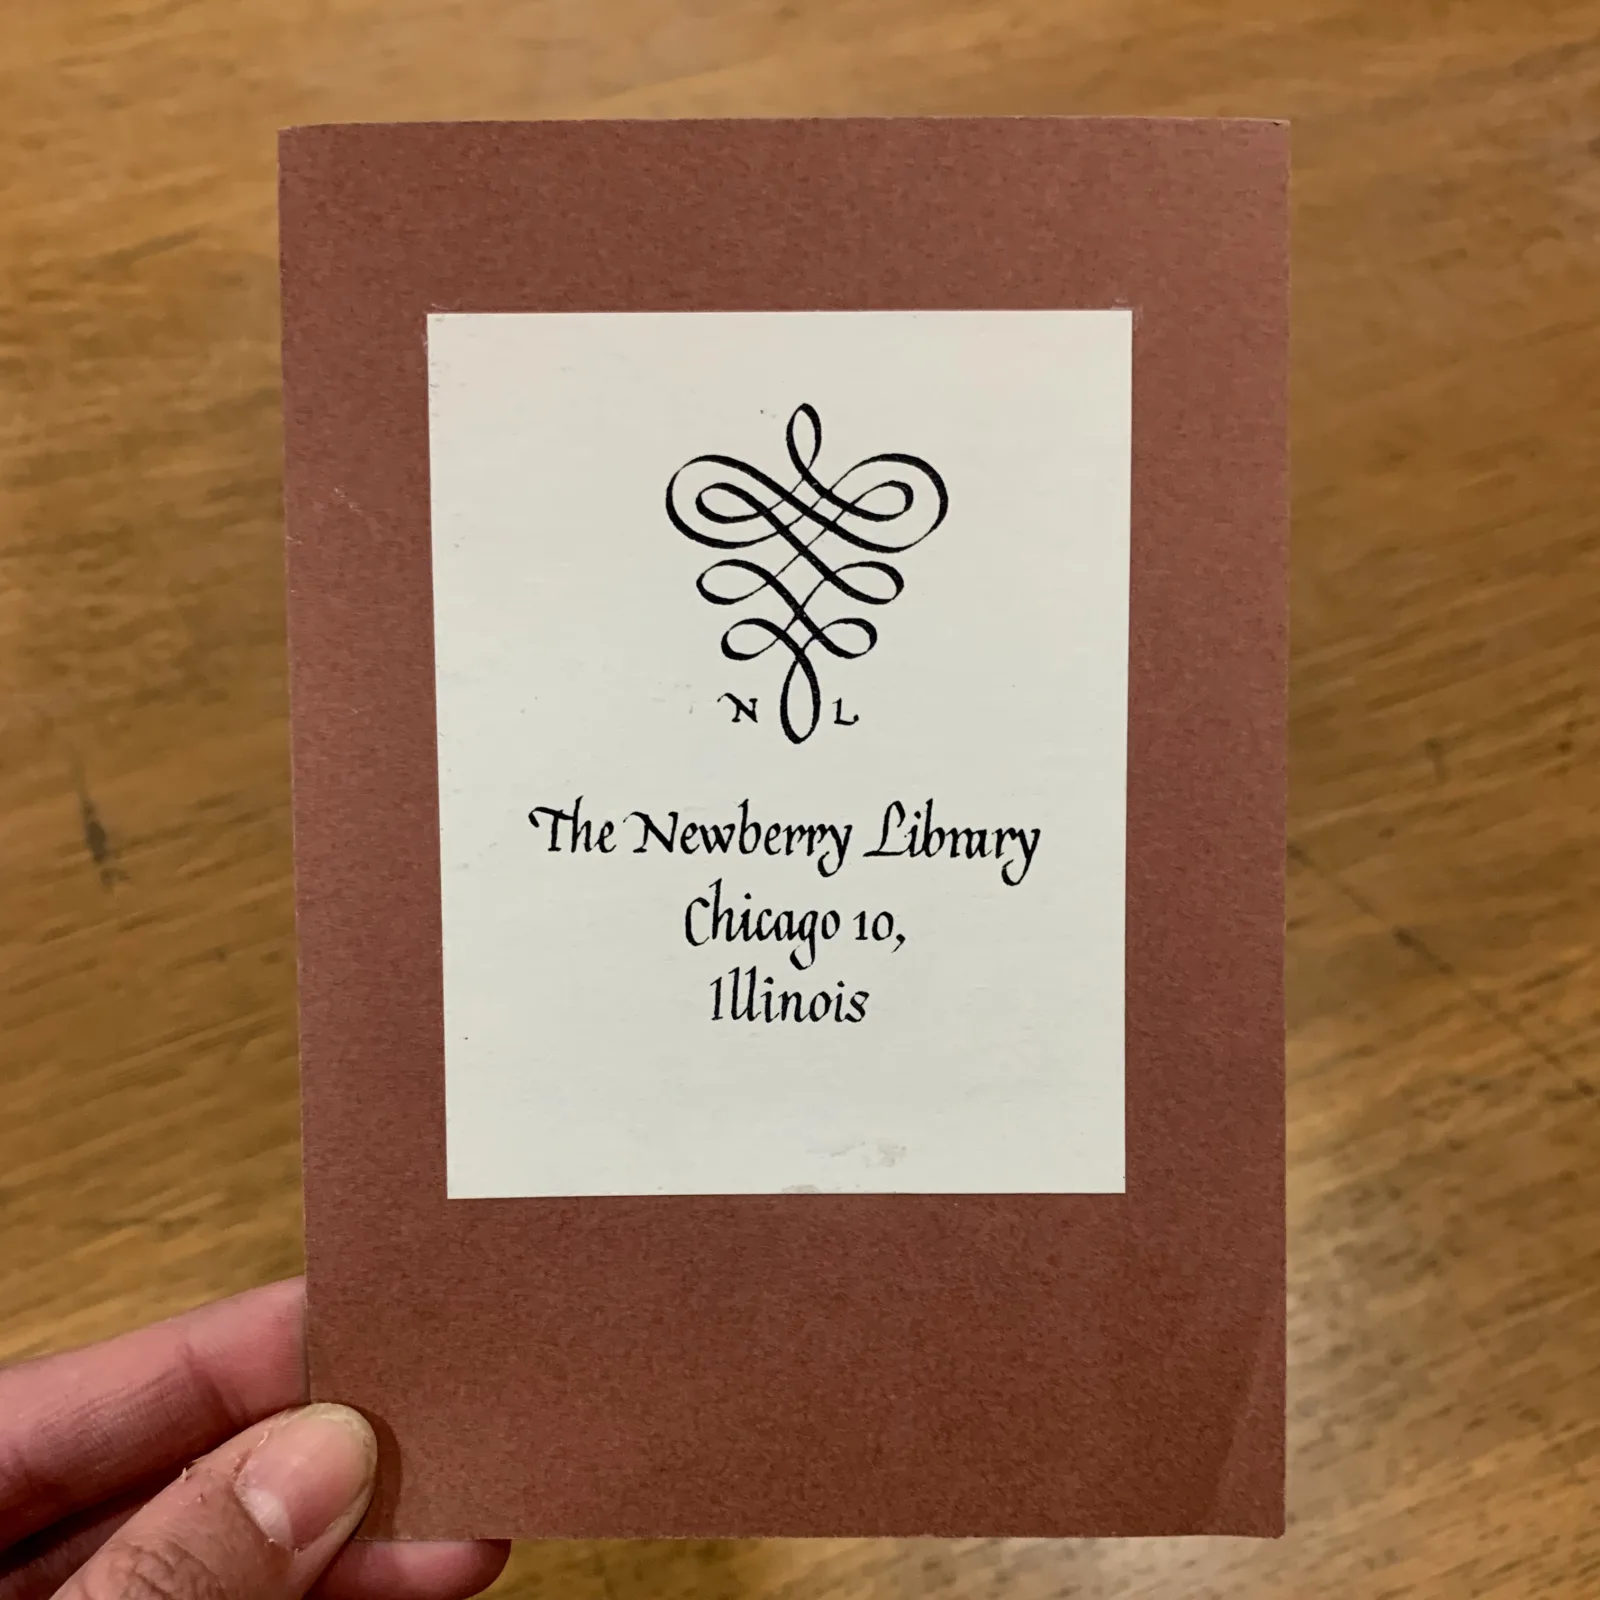 The bookplate reads, "The Newberry Library, Chicago 10, Illinois." At the top is a spiral design with "N" and "L" on either side.